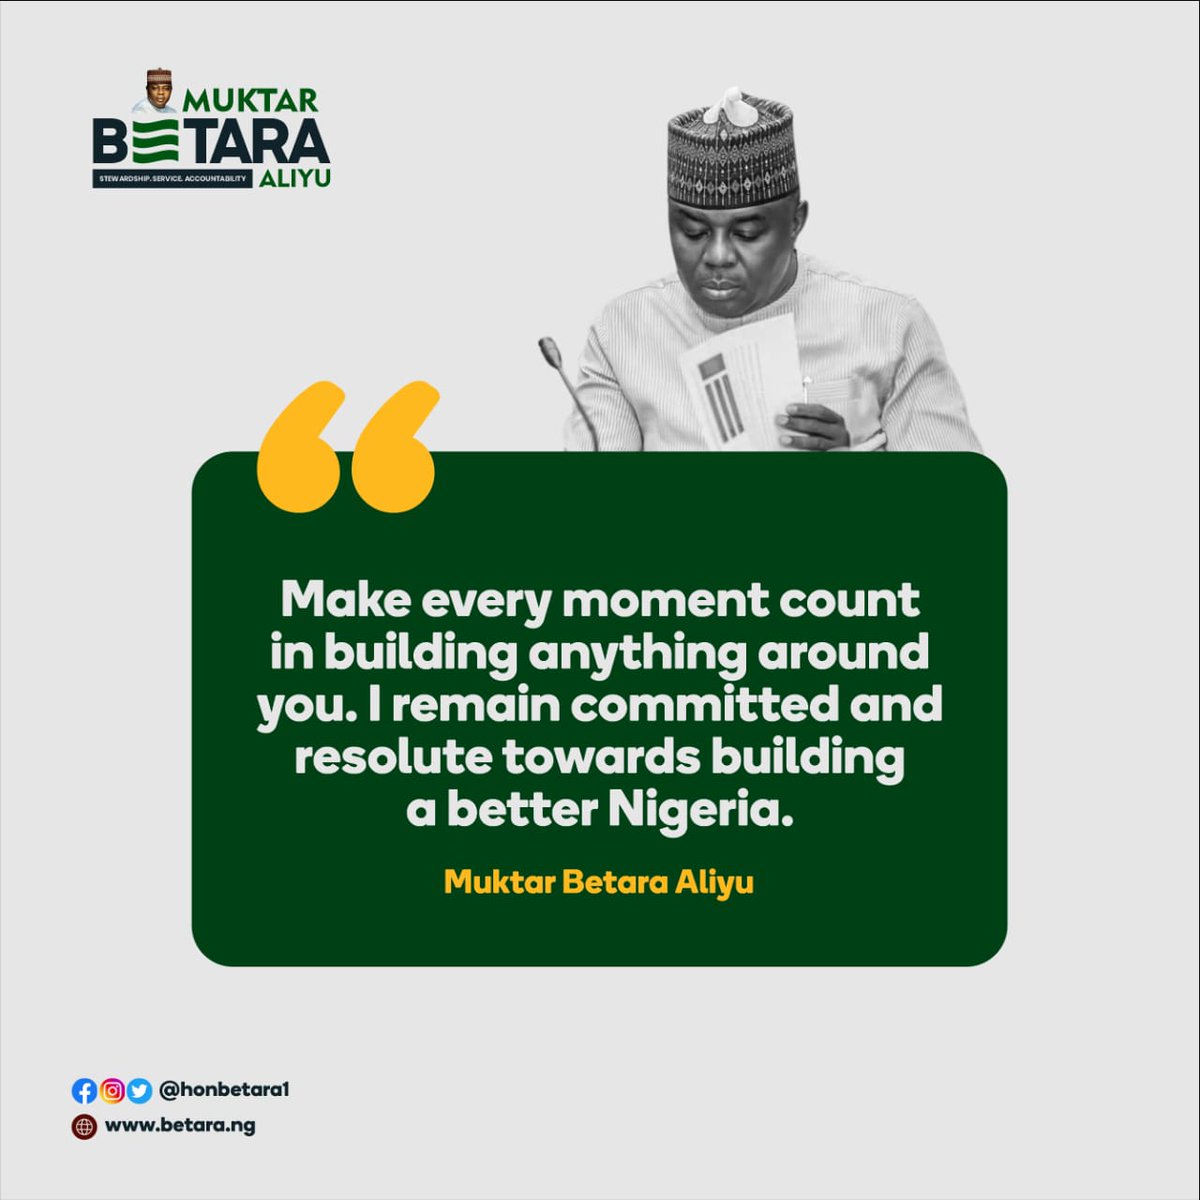 Let's build a better Nigeria together with @honbetara1

#sharedprosperity